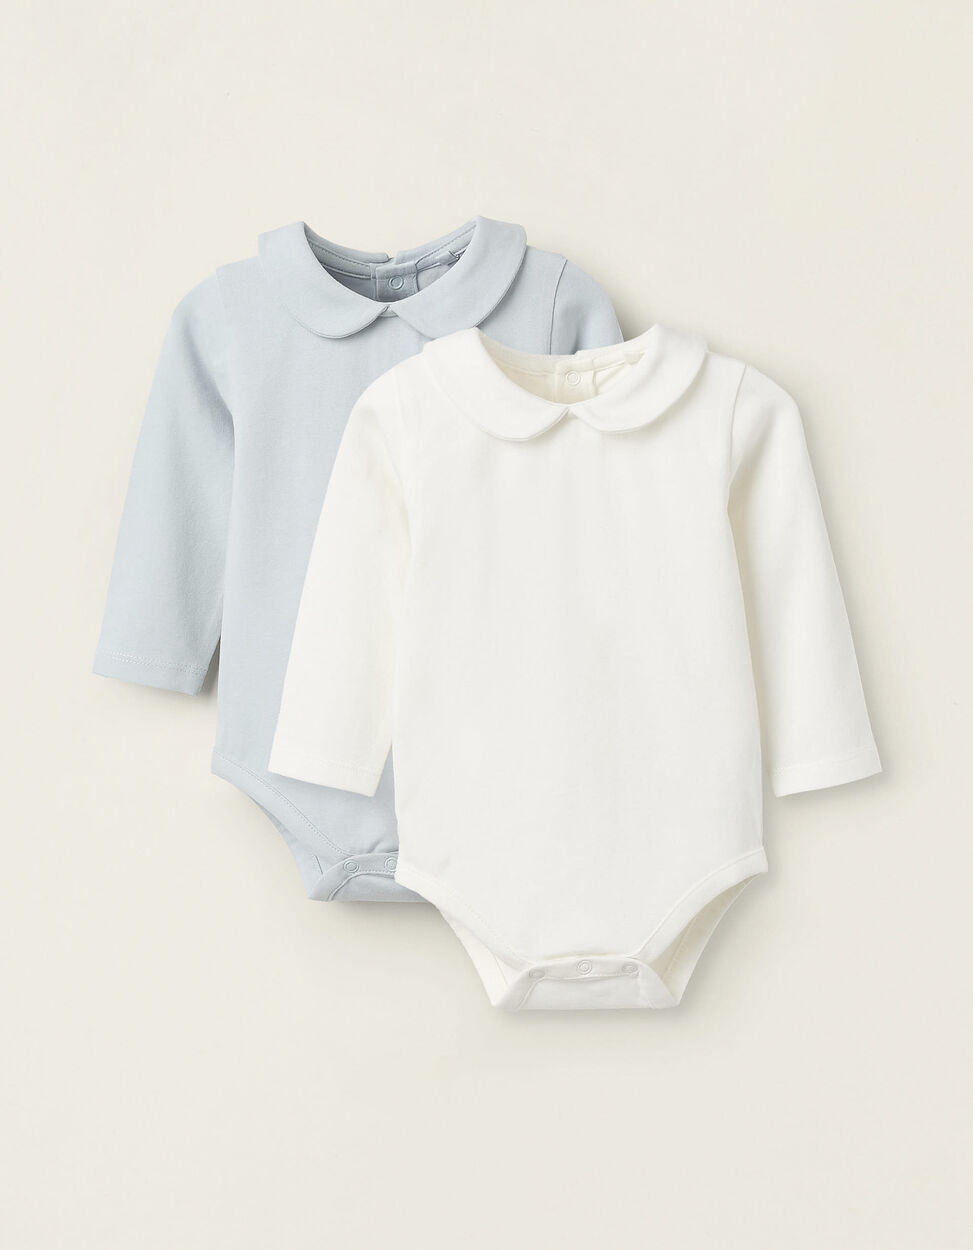 Buy Online Pack of 2 Bodysuits with Peter Pan Collar for Newborn Girls, White/Blue